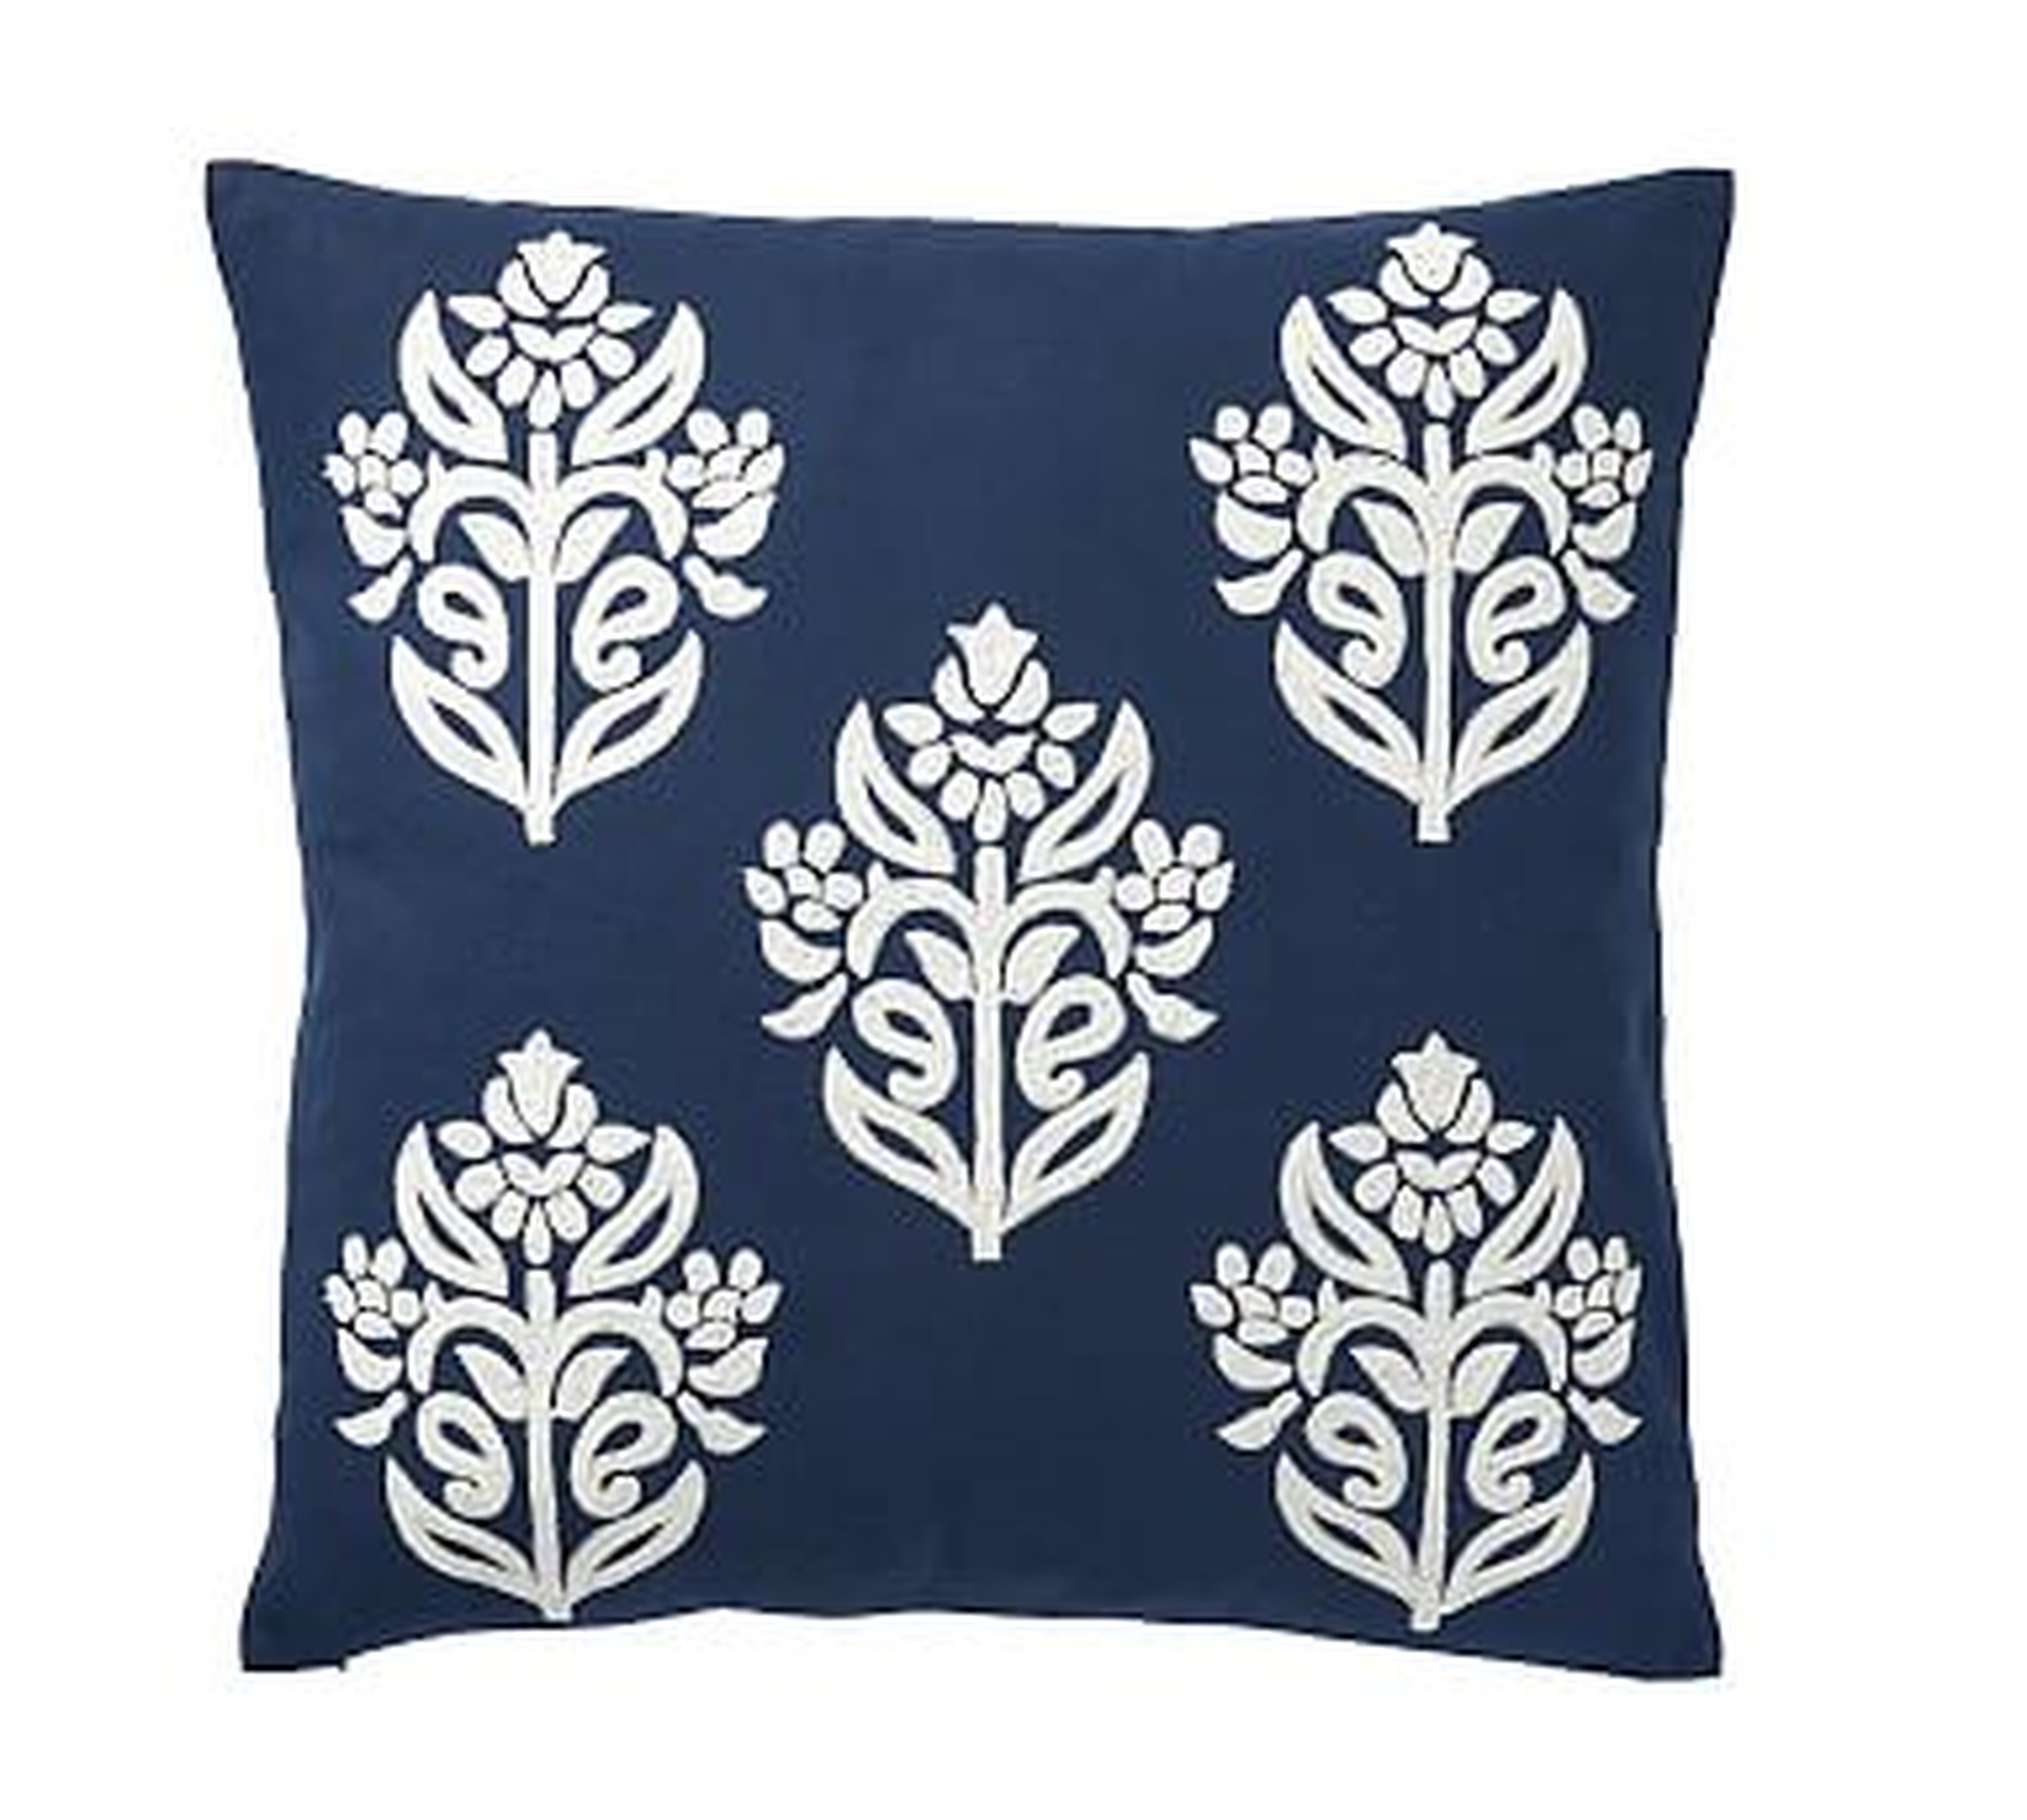 Kyla Embroidered Pillow Cover, 18", Navy/Ivory - Pottery Barn